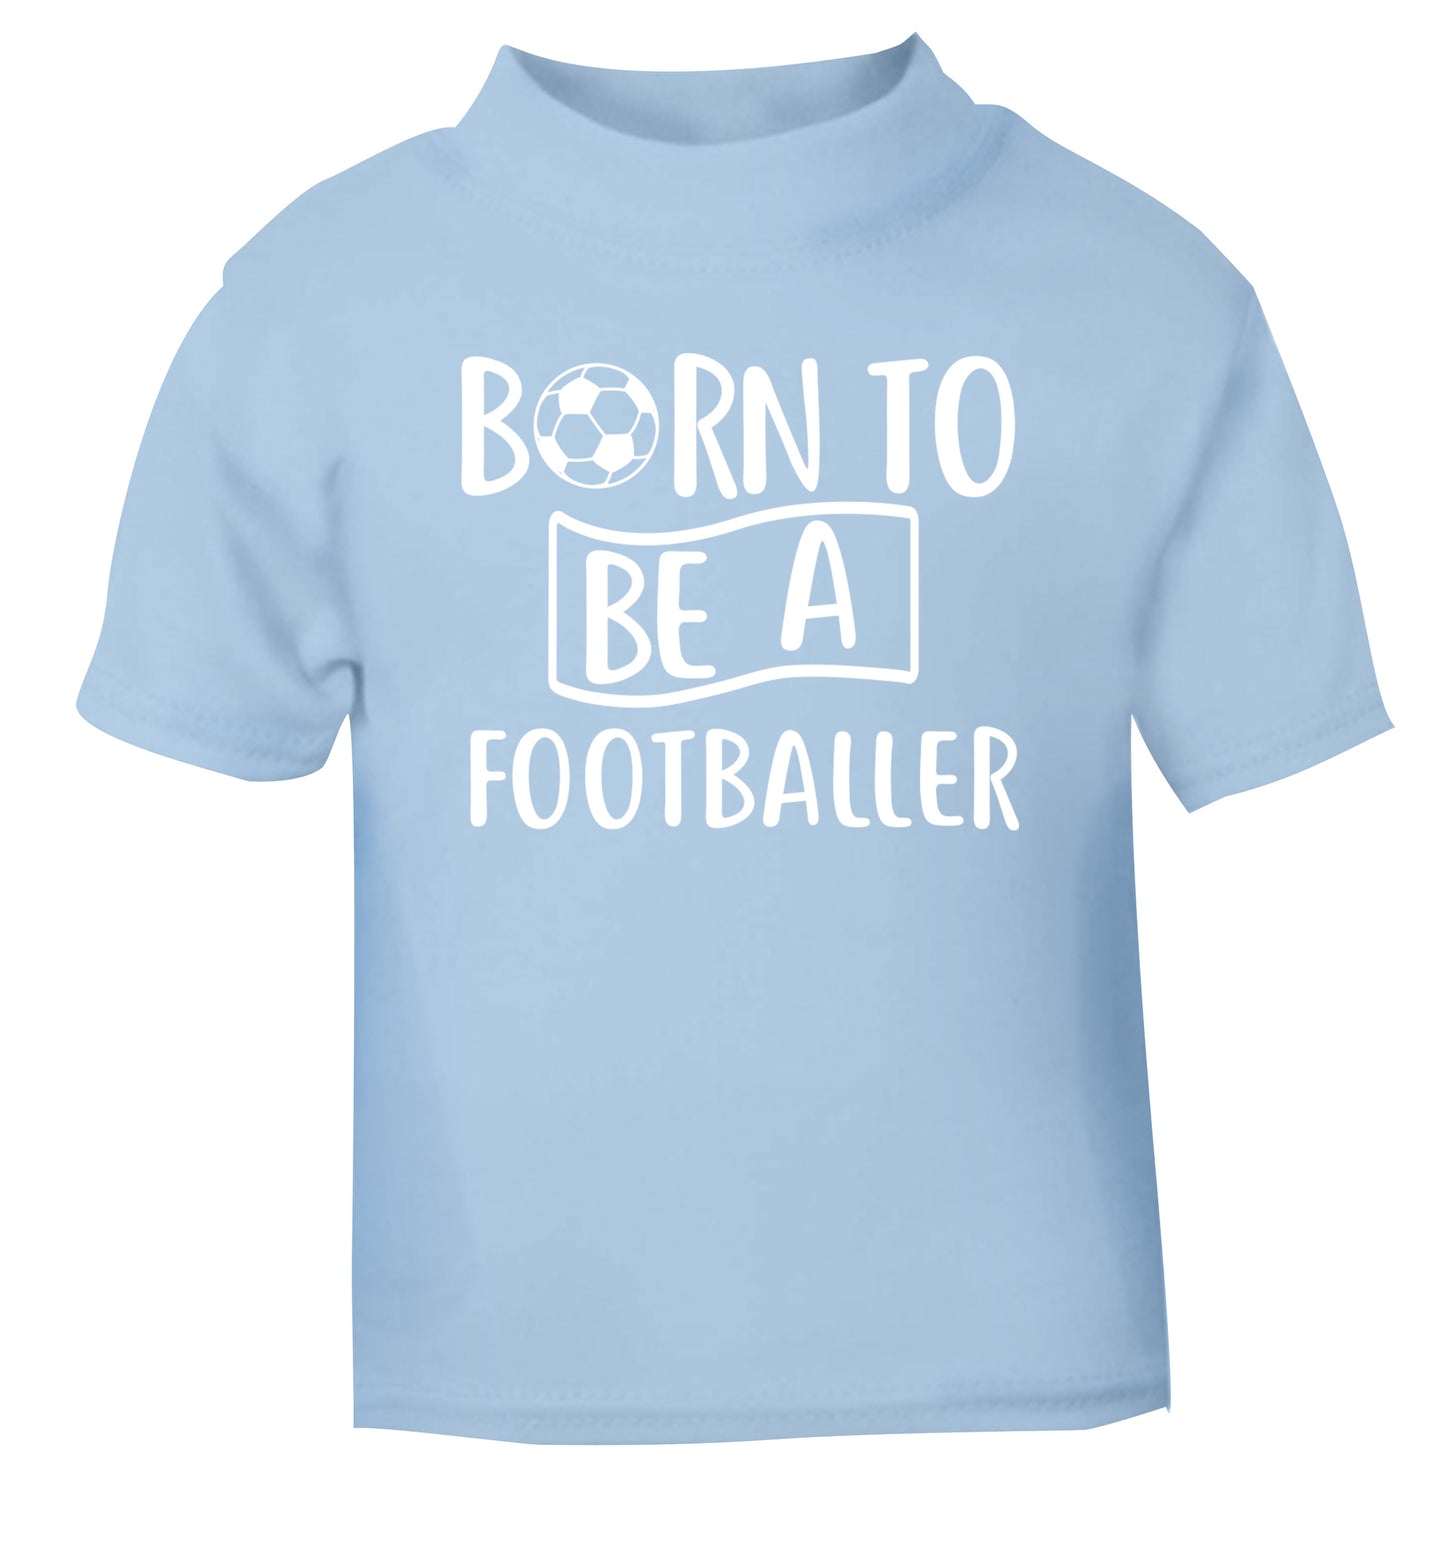 Born to be a footballer light blue Baby Toddler Tshirt 2 Years